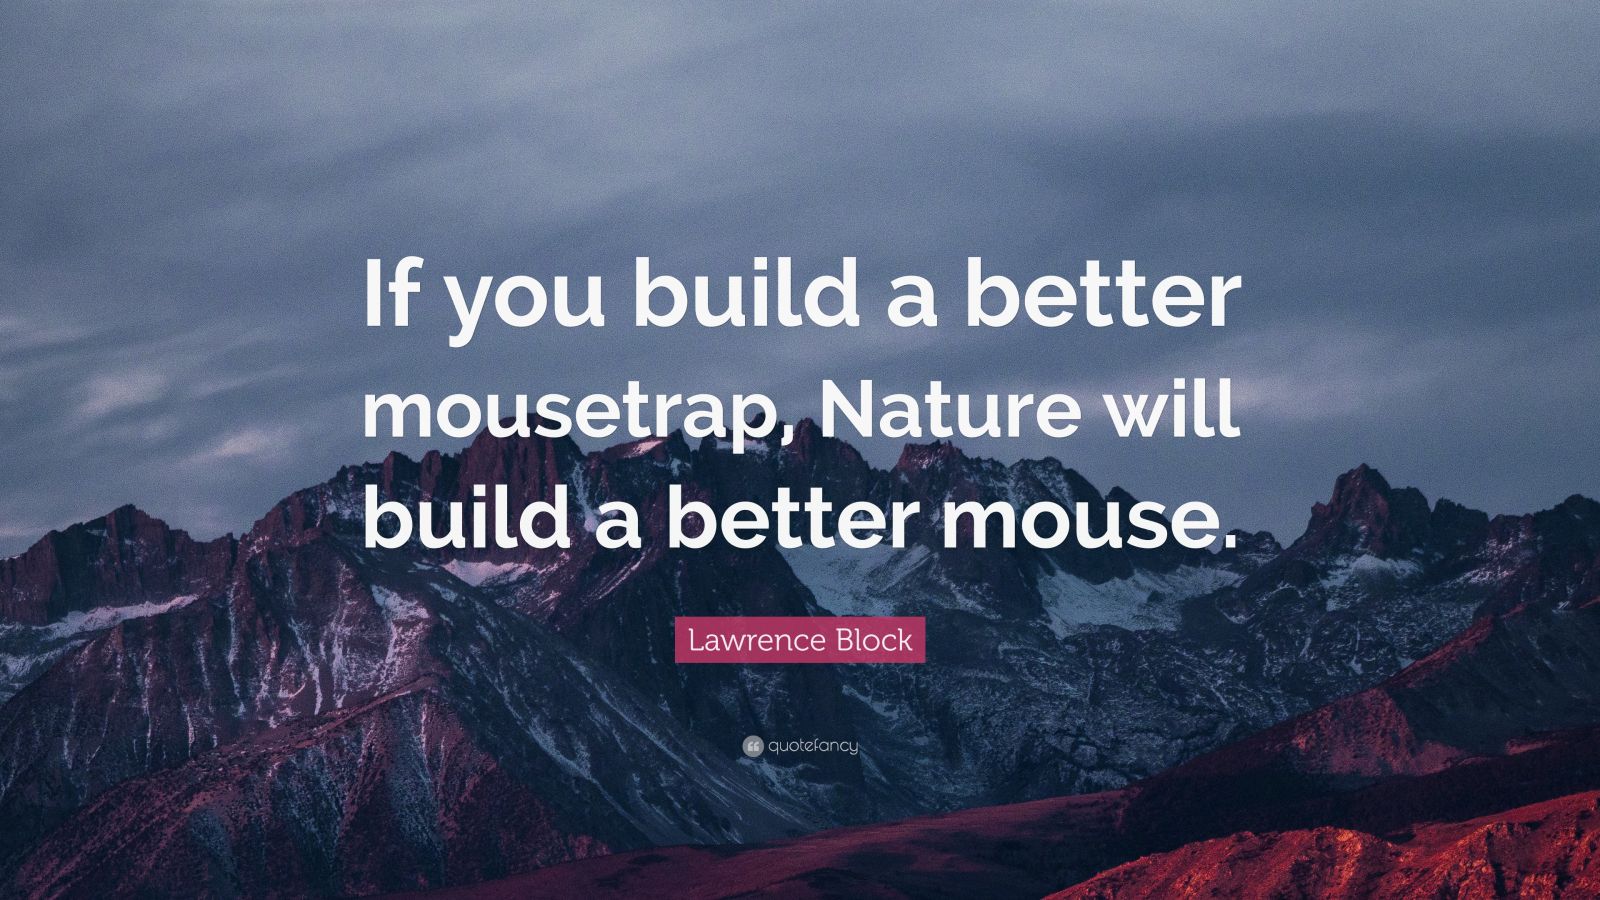 https://quotefancy.com/media/wallpaper/1600x900/2993741-Lawrence-Block-Quote-If-you-build-a-better-mousetrap-Nature-will.jpg